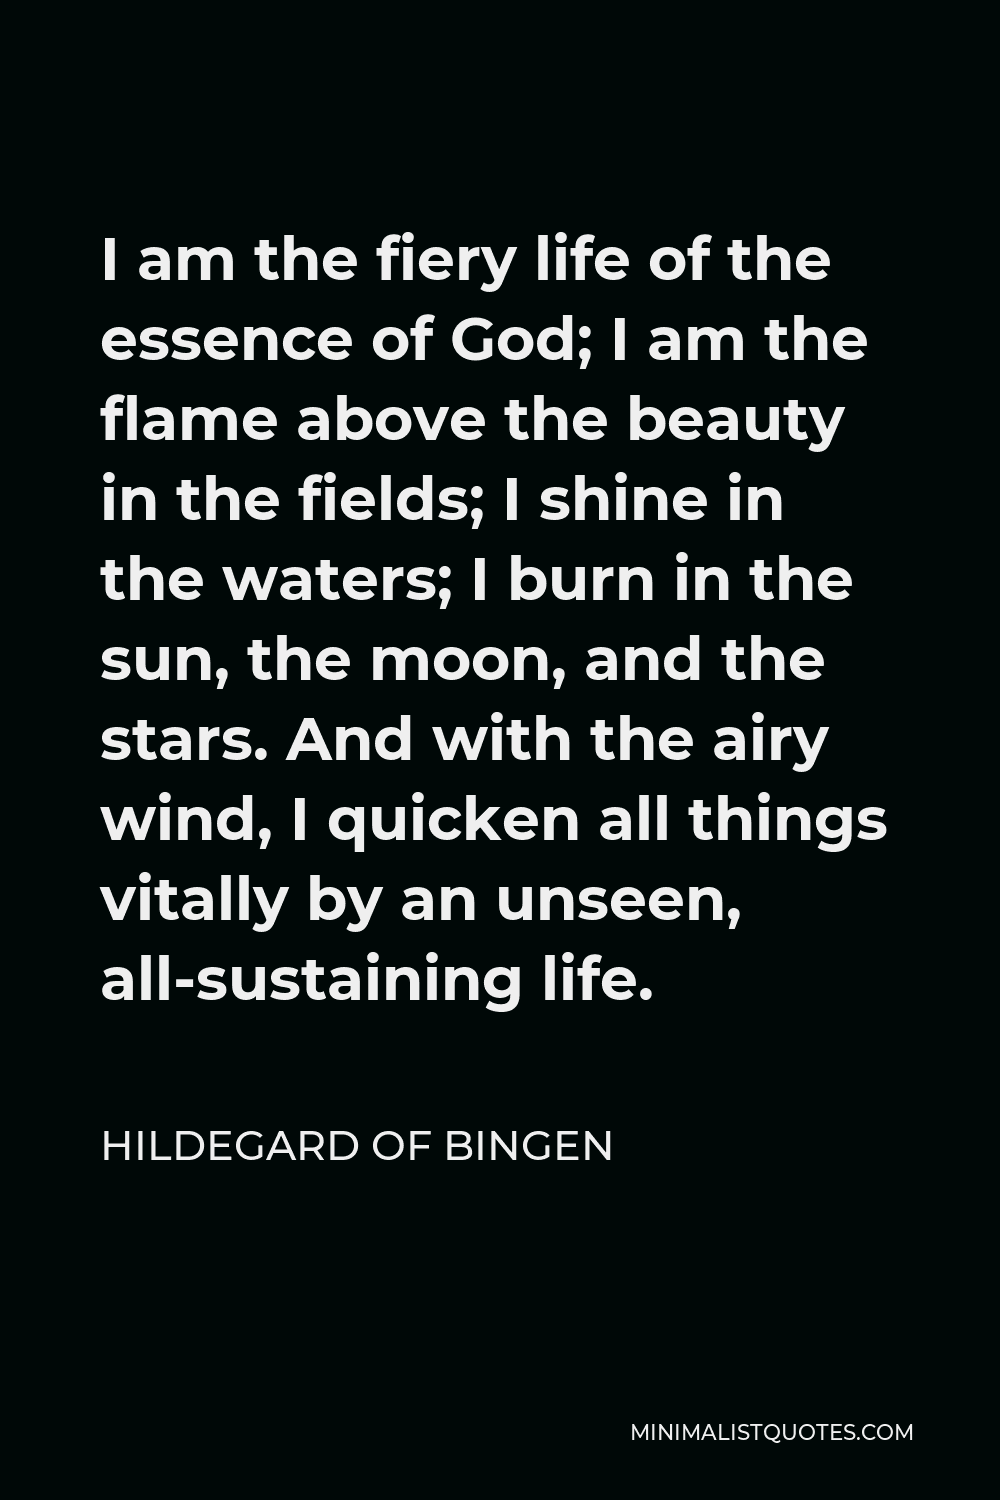 Hildegard of Bingen Quote - I am the fiery life of the essence of God; I am the flame above the beauty in the fields; I shine in the waters; I burn in the sun, the moon, and the stars. And with the airy wind, I quicken all things vitally by an unseen, all-sustaining life.